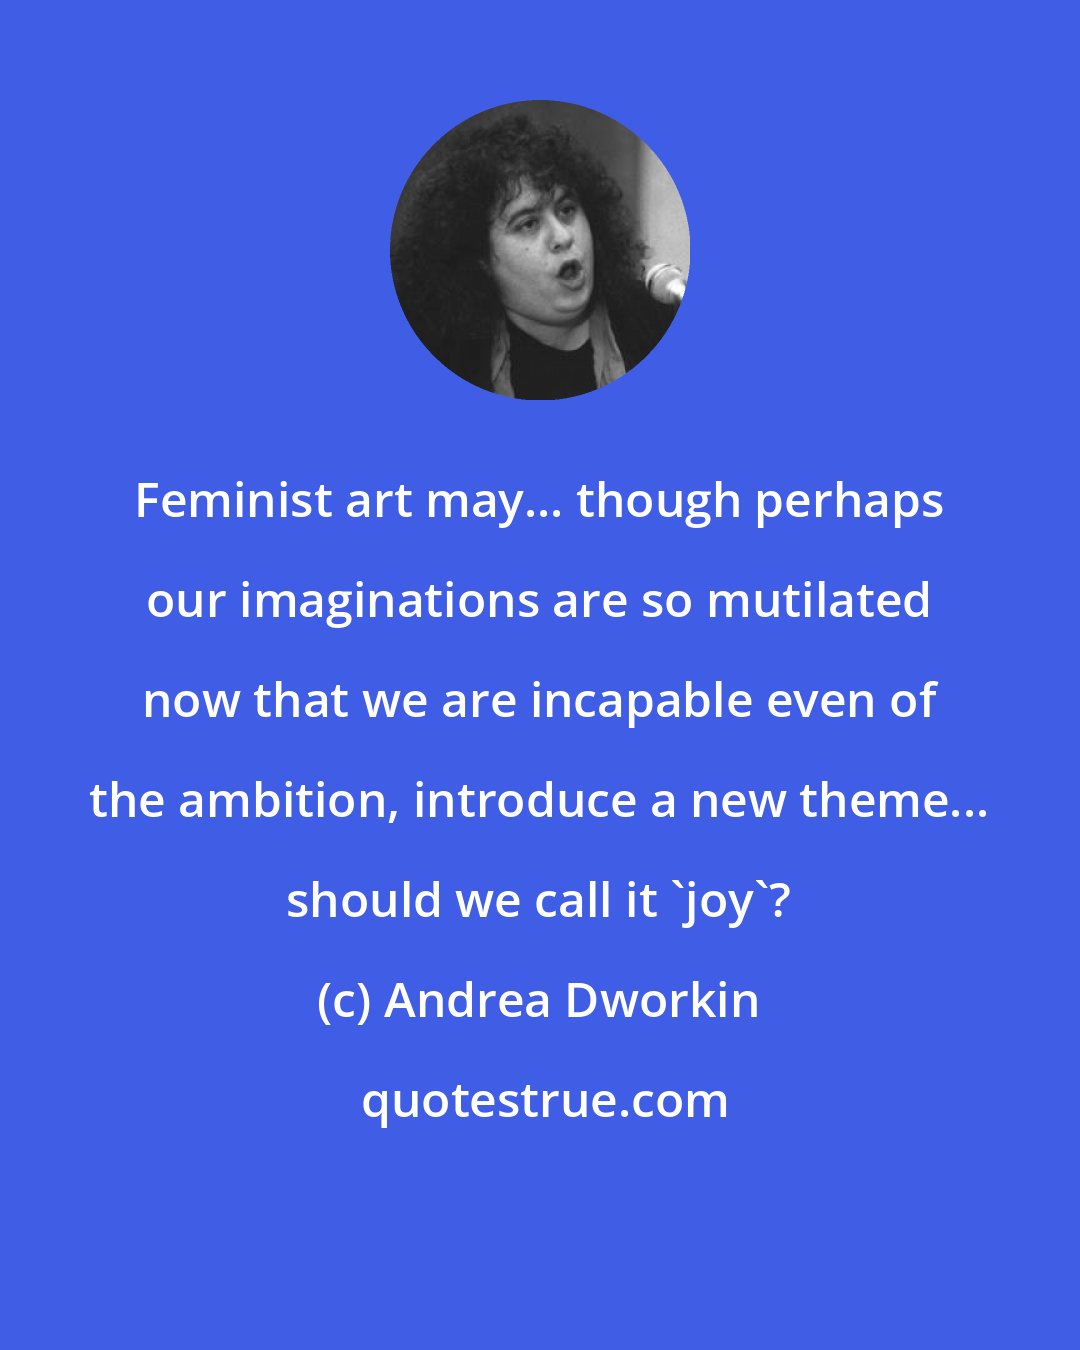 Andrea Dworkin: Feminist art may... though perhaps our imaginations are so mutilated now that we are incapable even of the ambition, introduce a new theme... should we call it 'joy'?